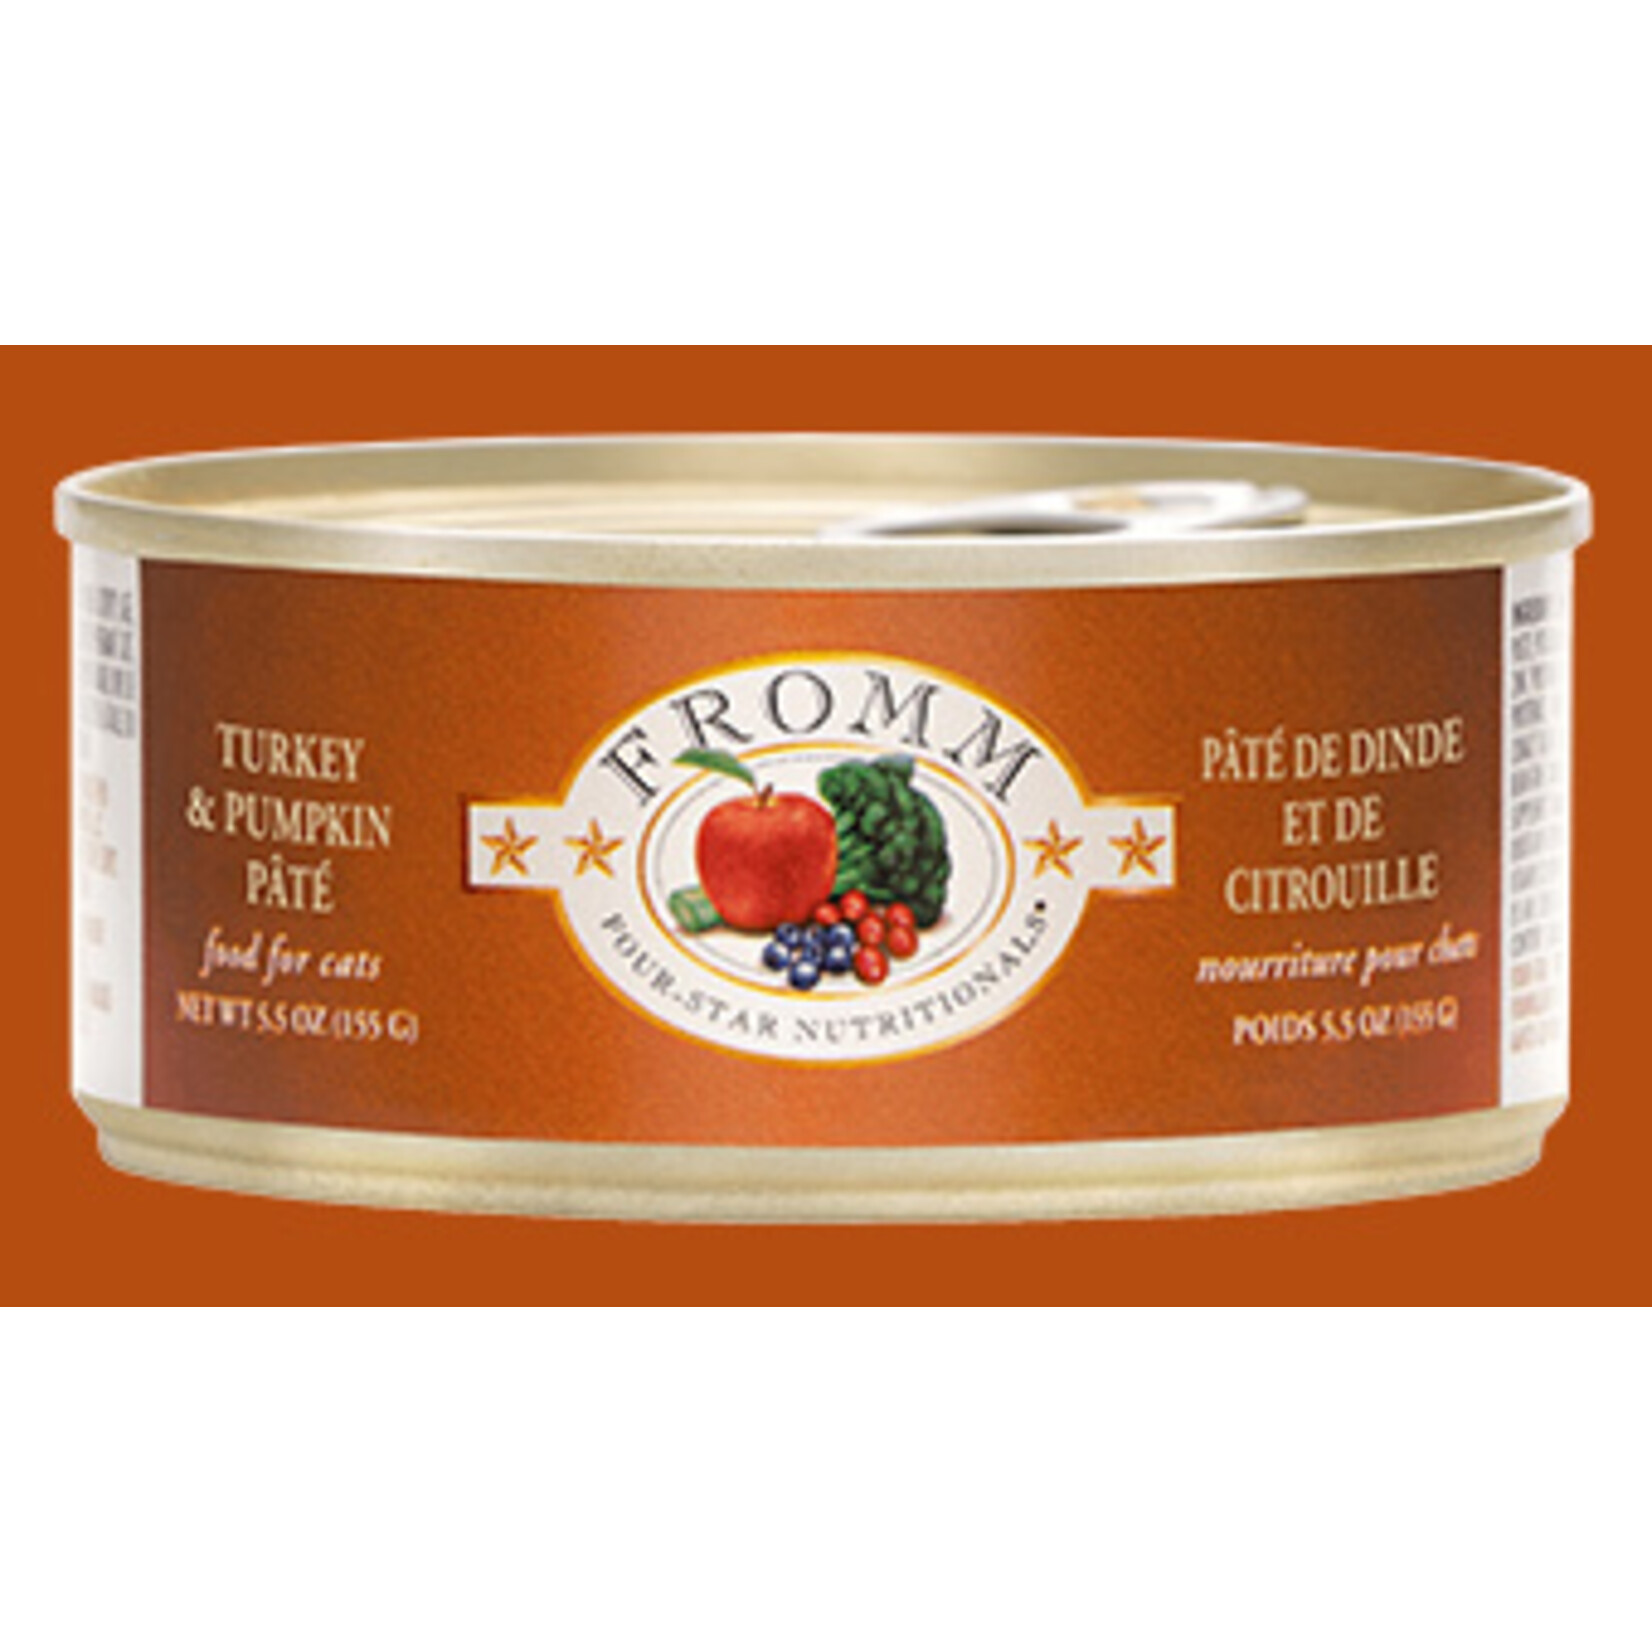 Fromm Fromm Pate Turkey and Pumpkin 5.5oz